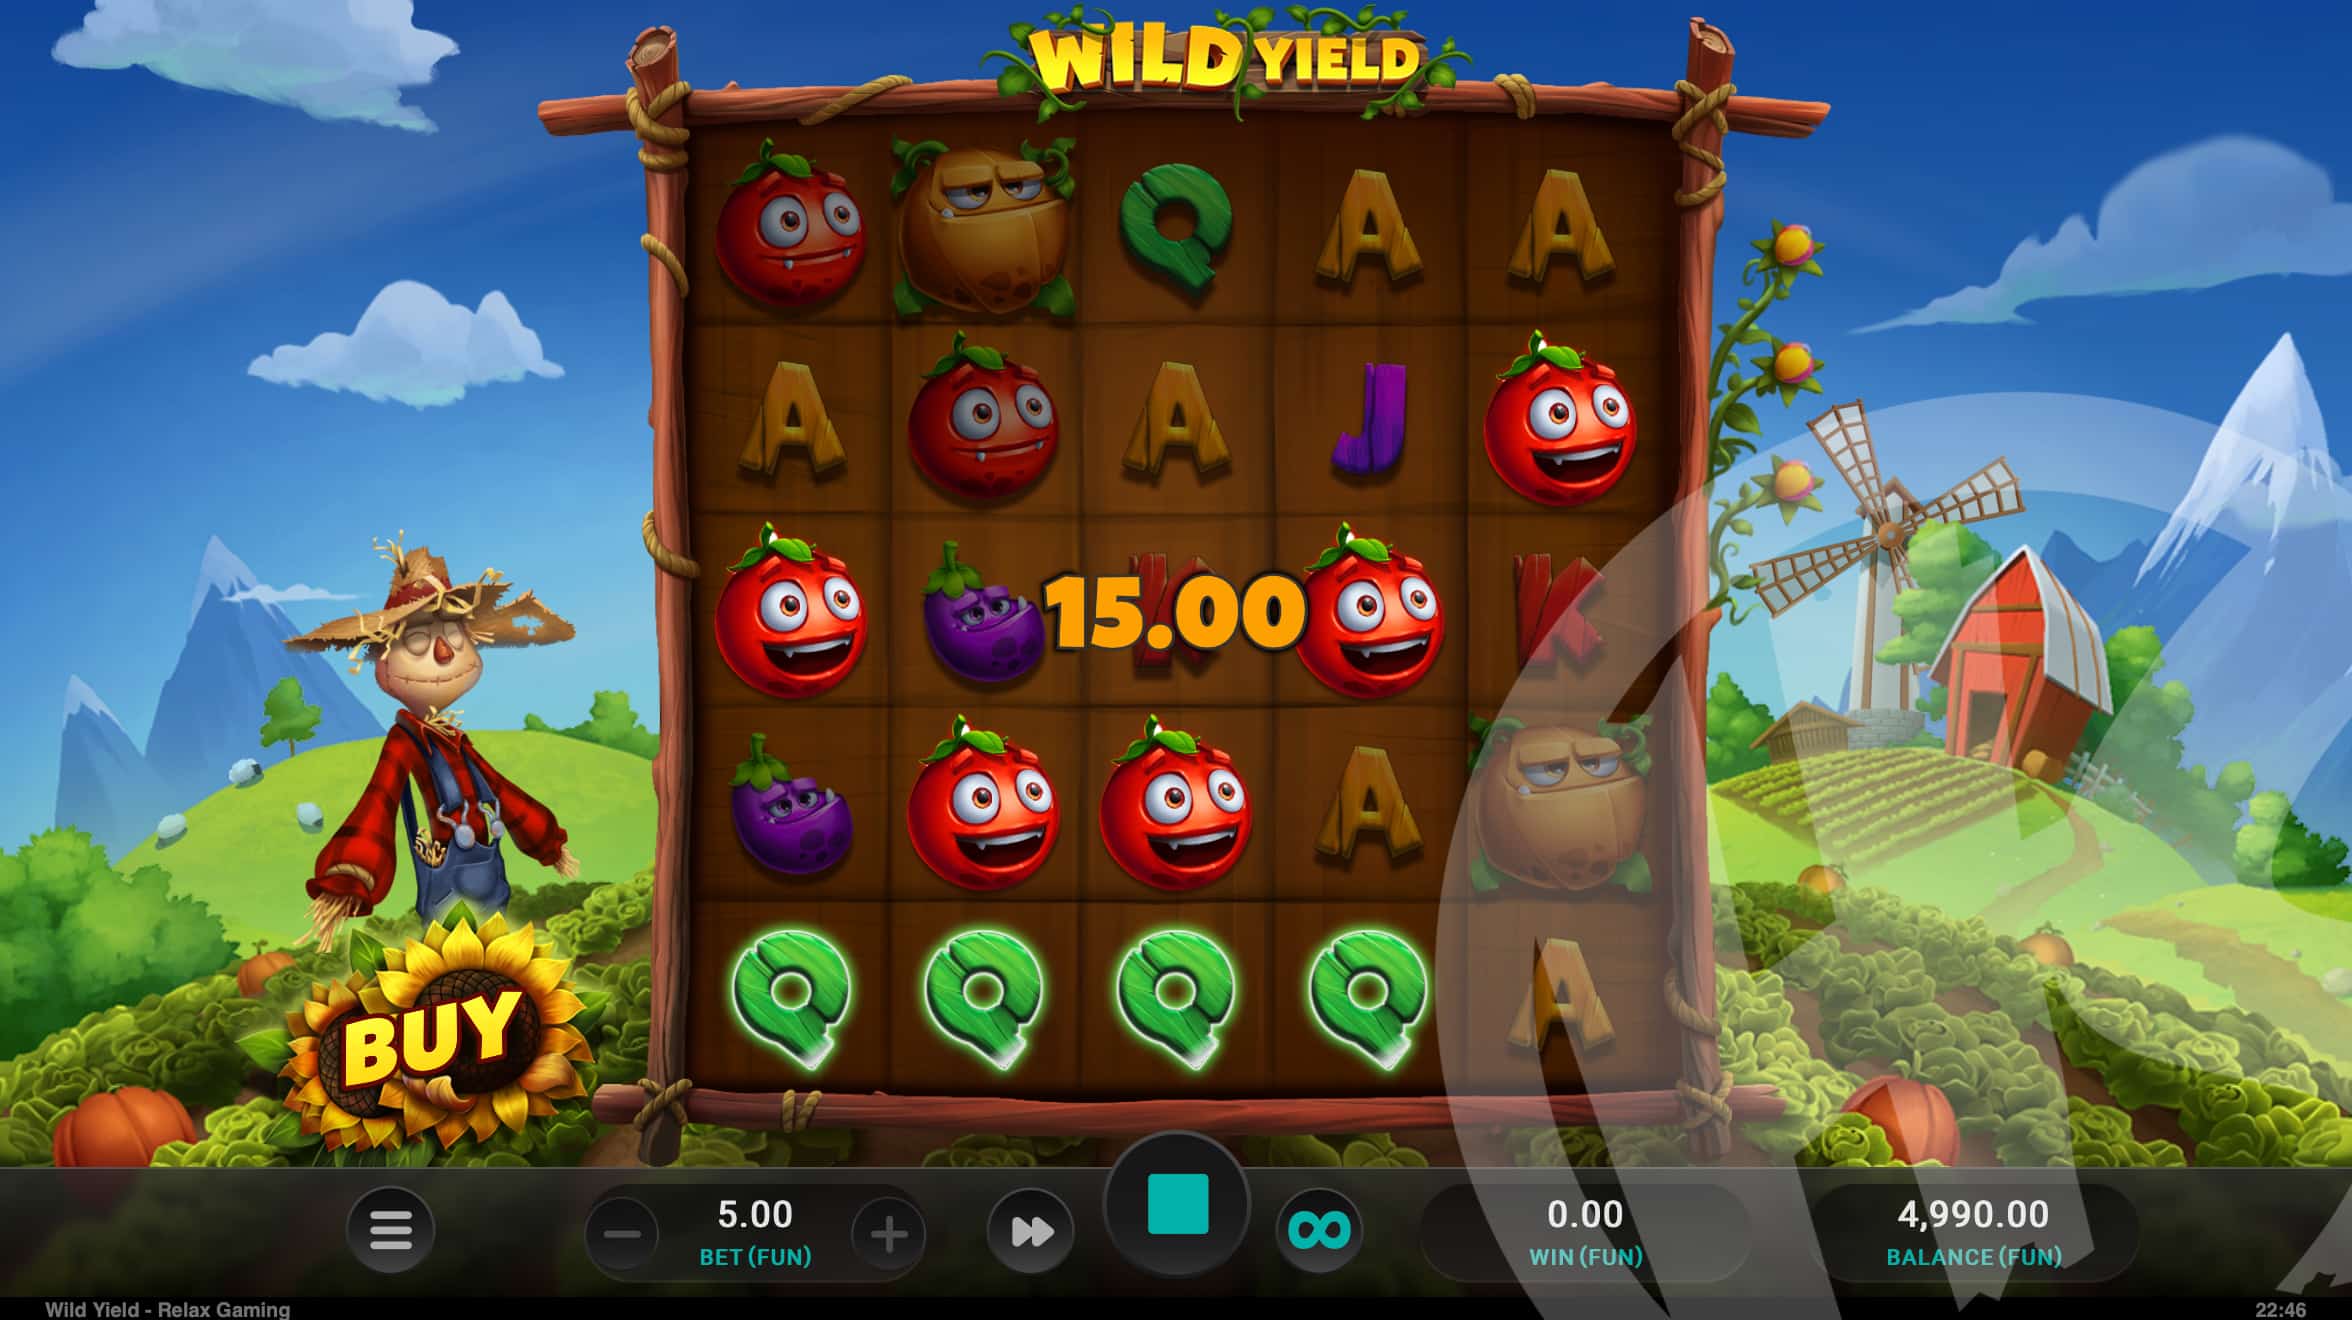 Wild Yield Offers Players 259 Connected Ways to Win